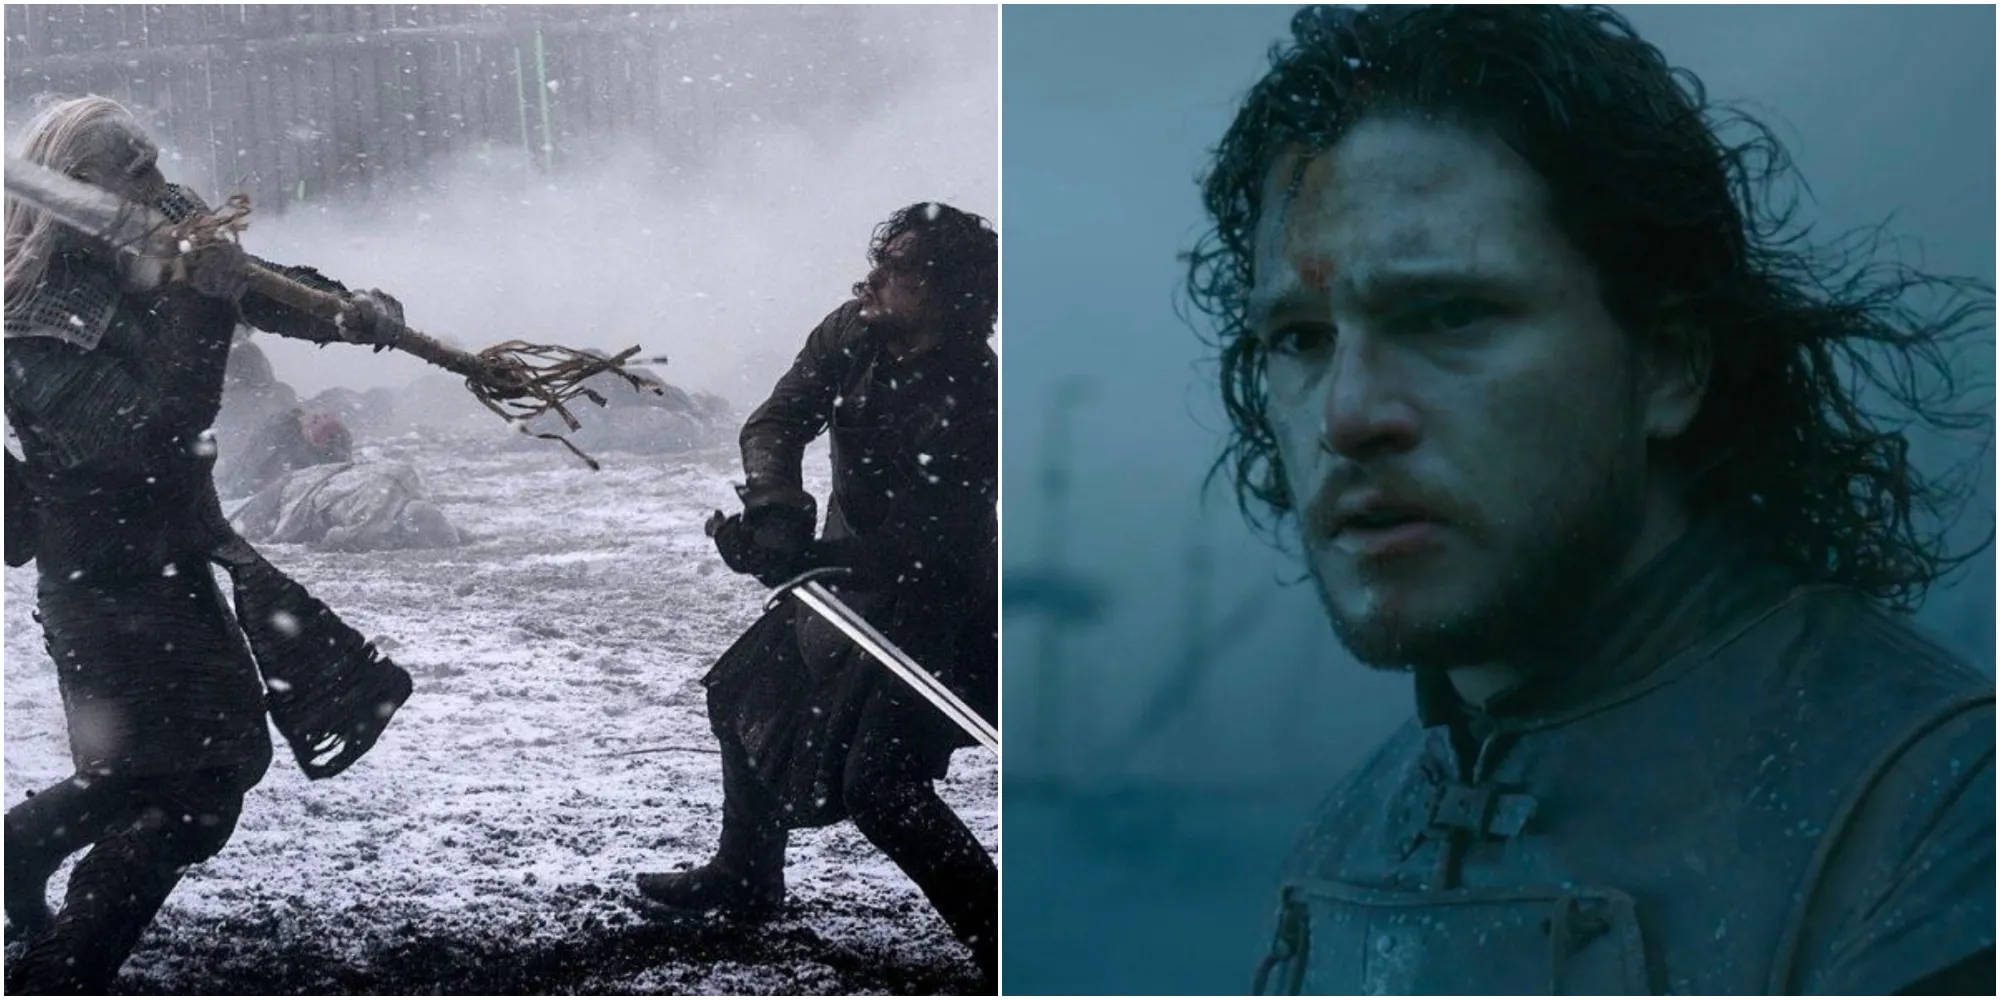 Split image of Jon Snow fighting the White Walker and him at Hardhome in Game of Thrones.